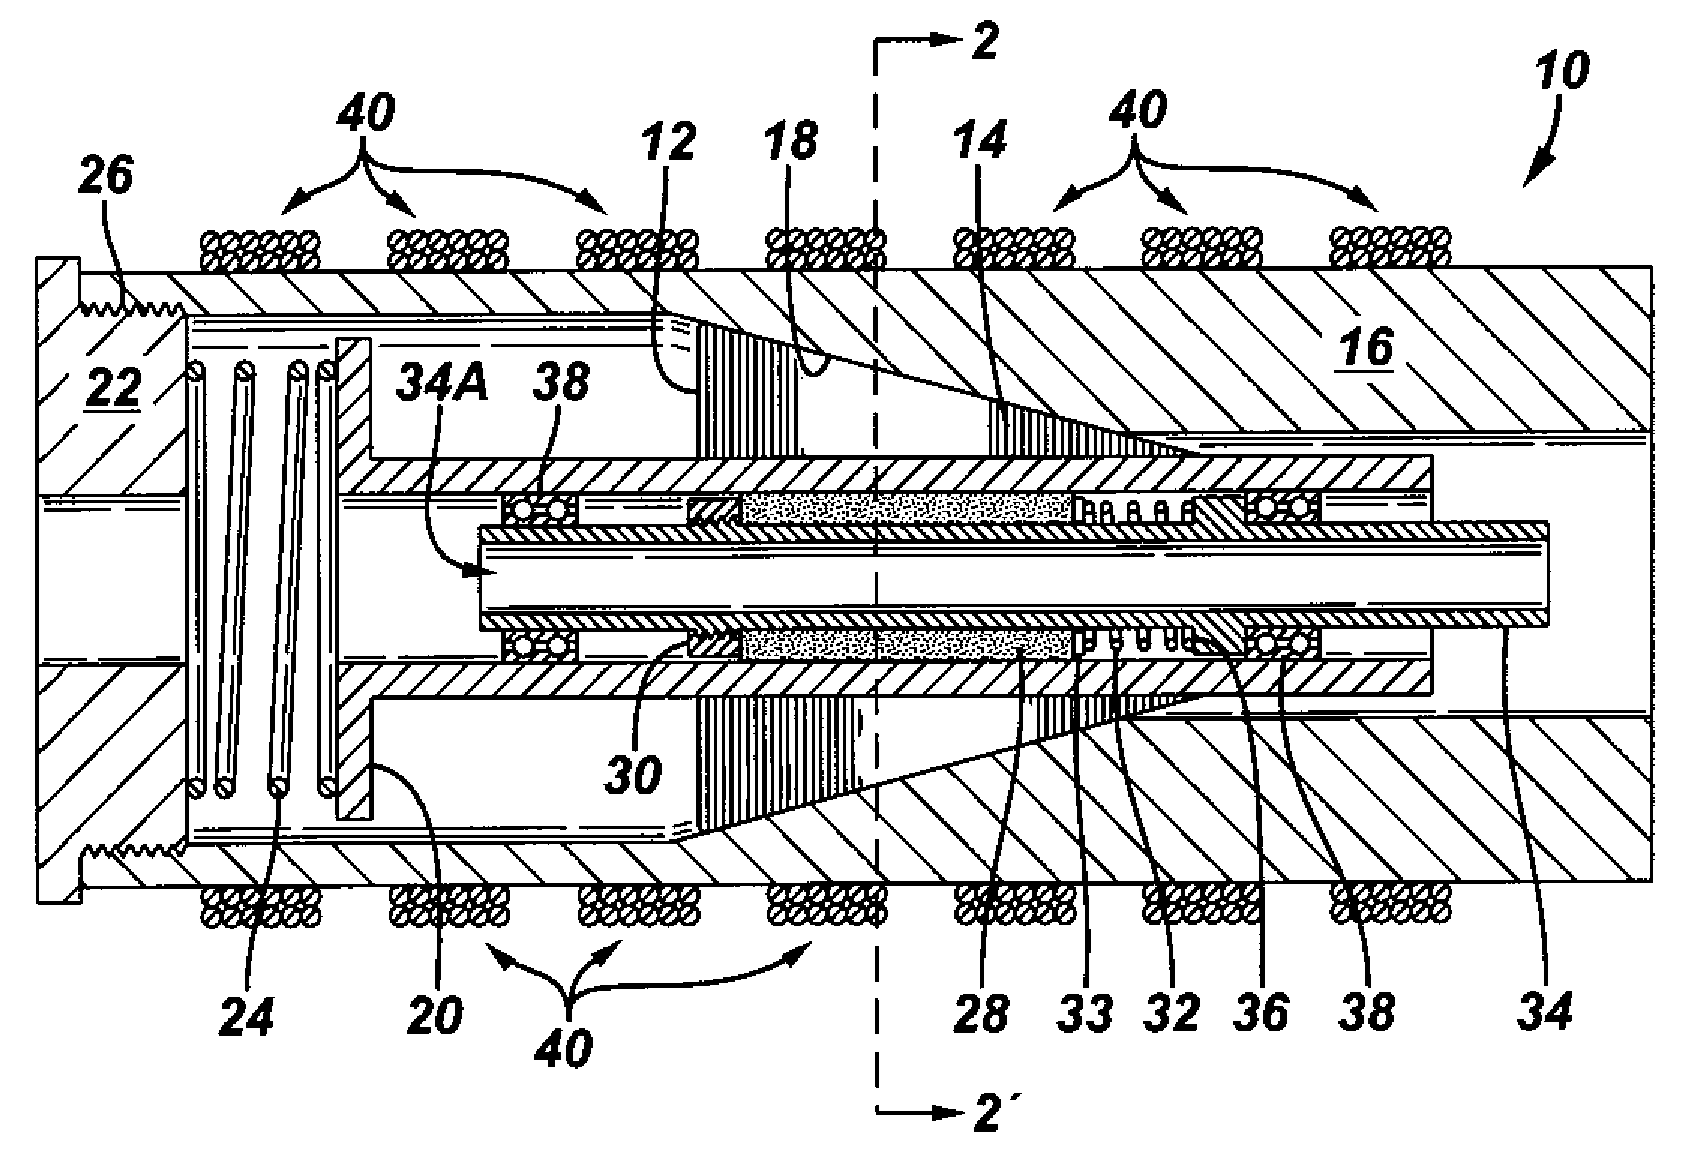 Linear actuator using magnetostrictive power element